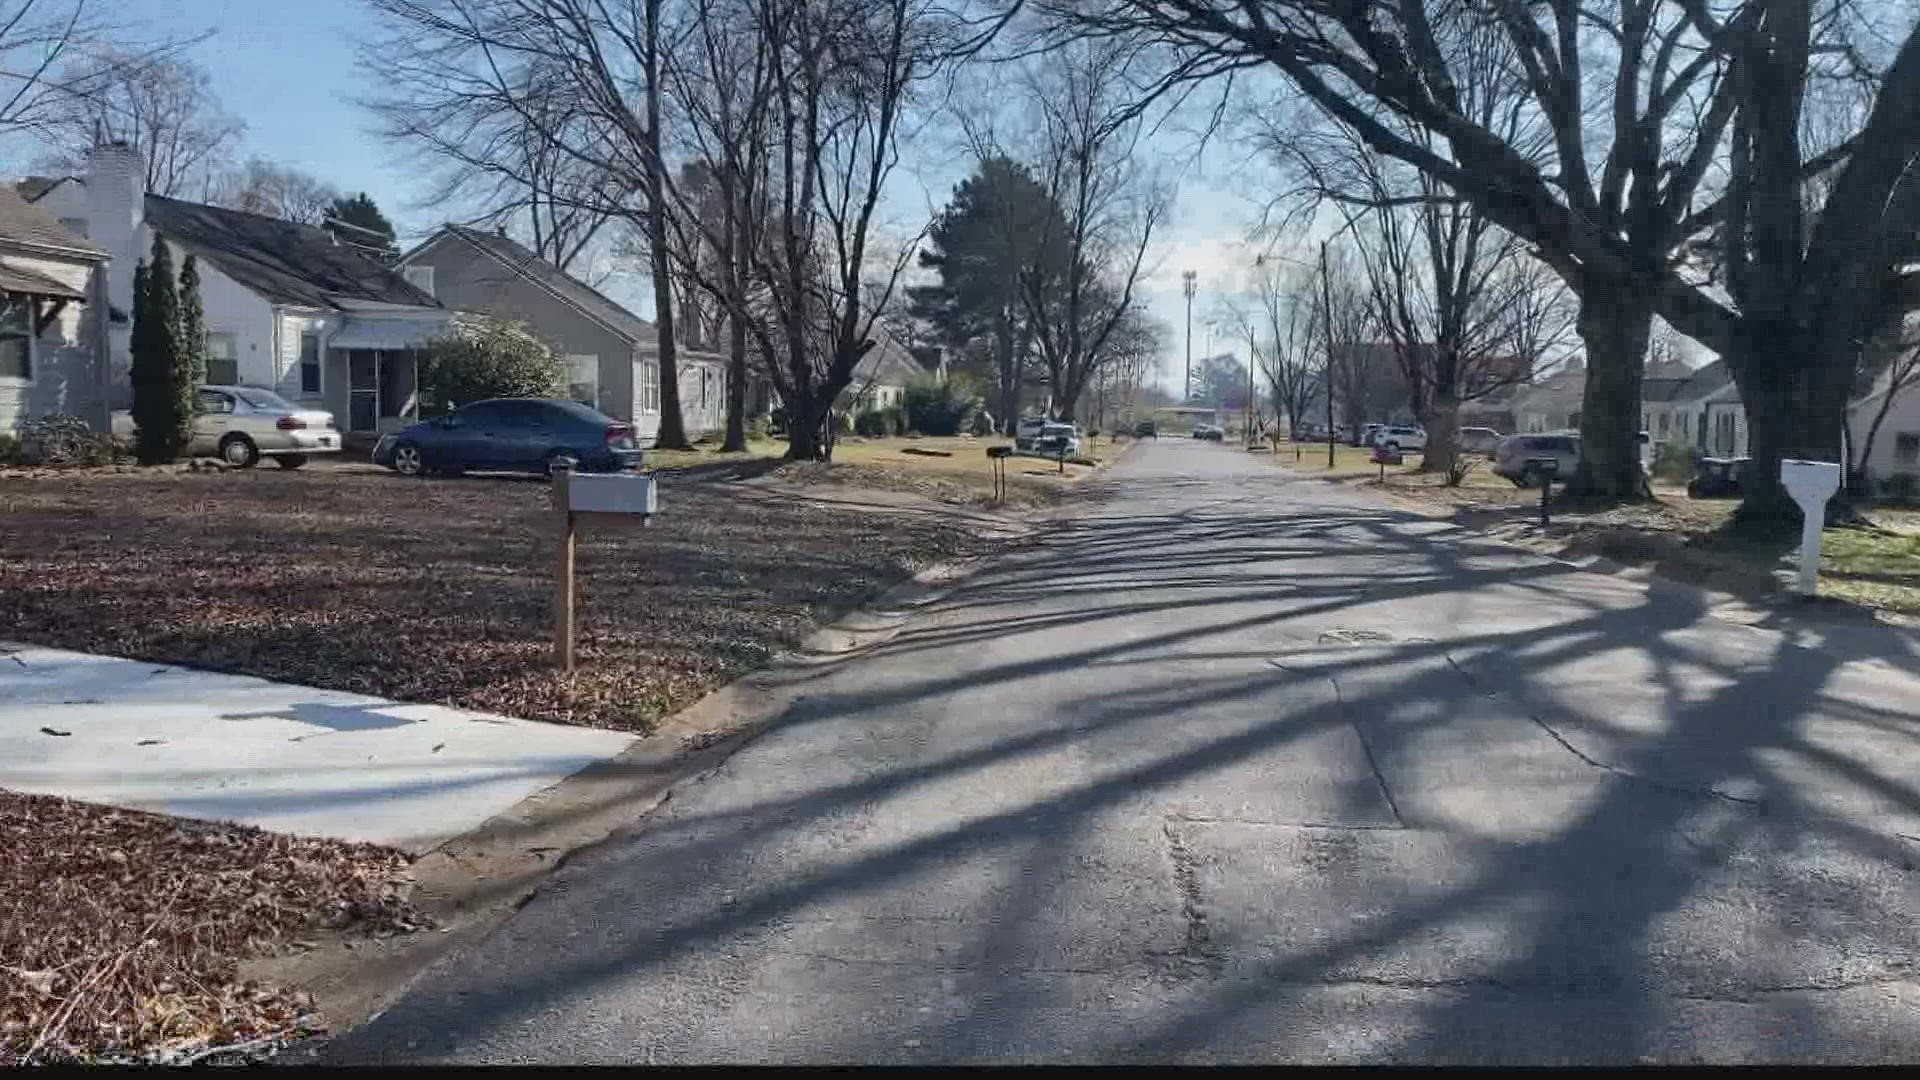 The $7 million project would resurface about 42 residential streets in the city of Huntsville